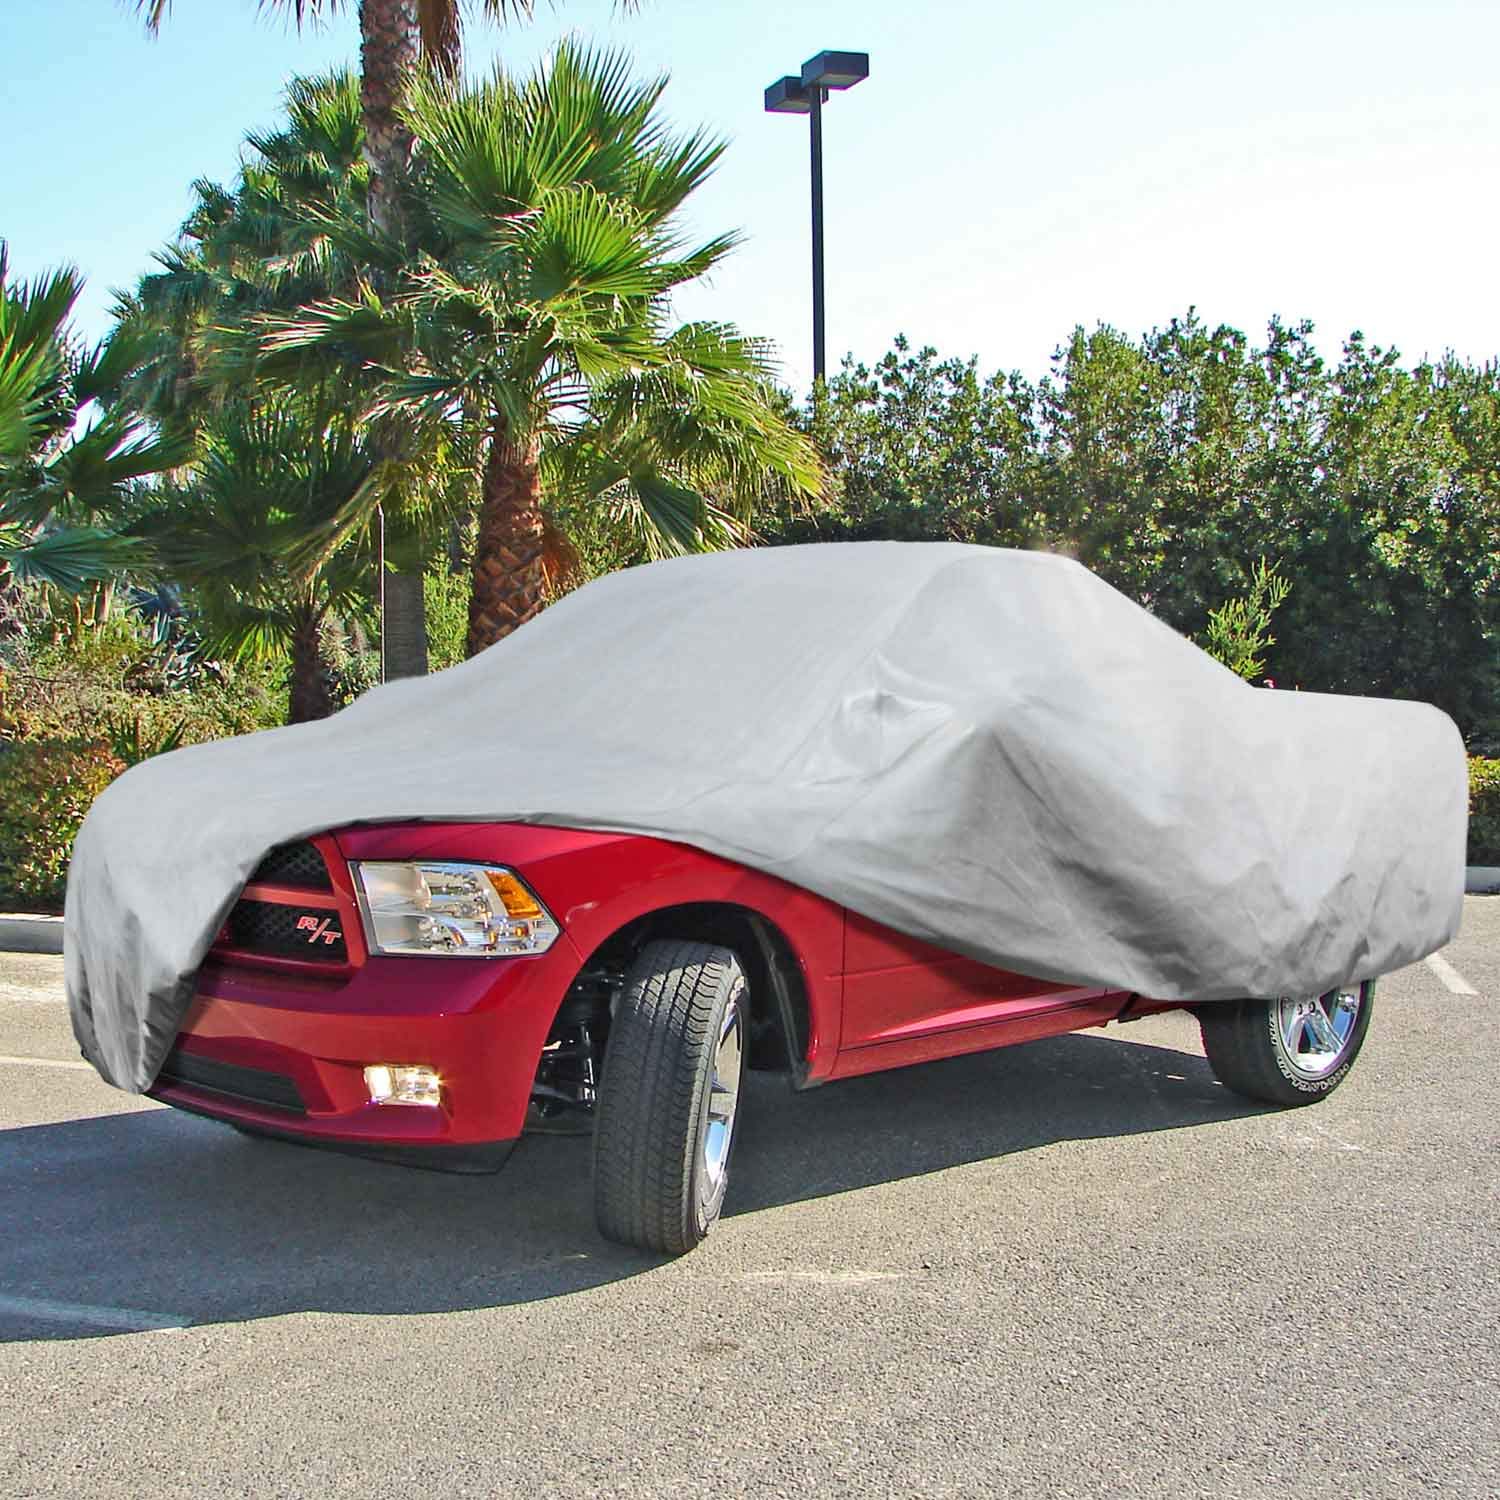 BASIC-Guard-Car-Cover-Fit-Car's-Length-Up-to-Truck-Cover-3